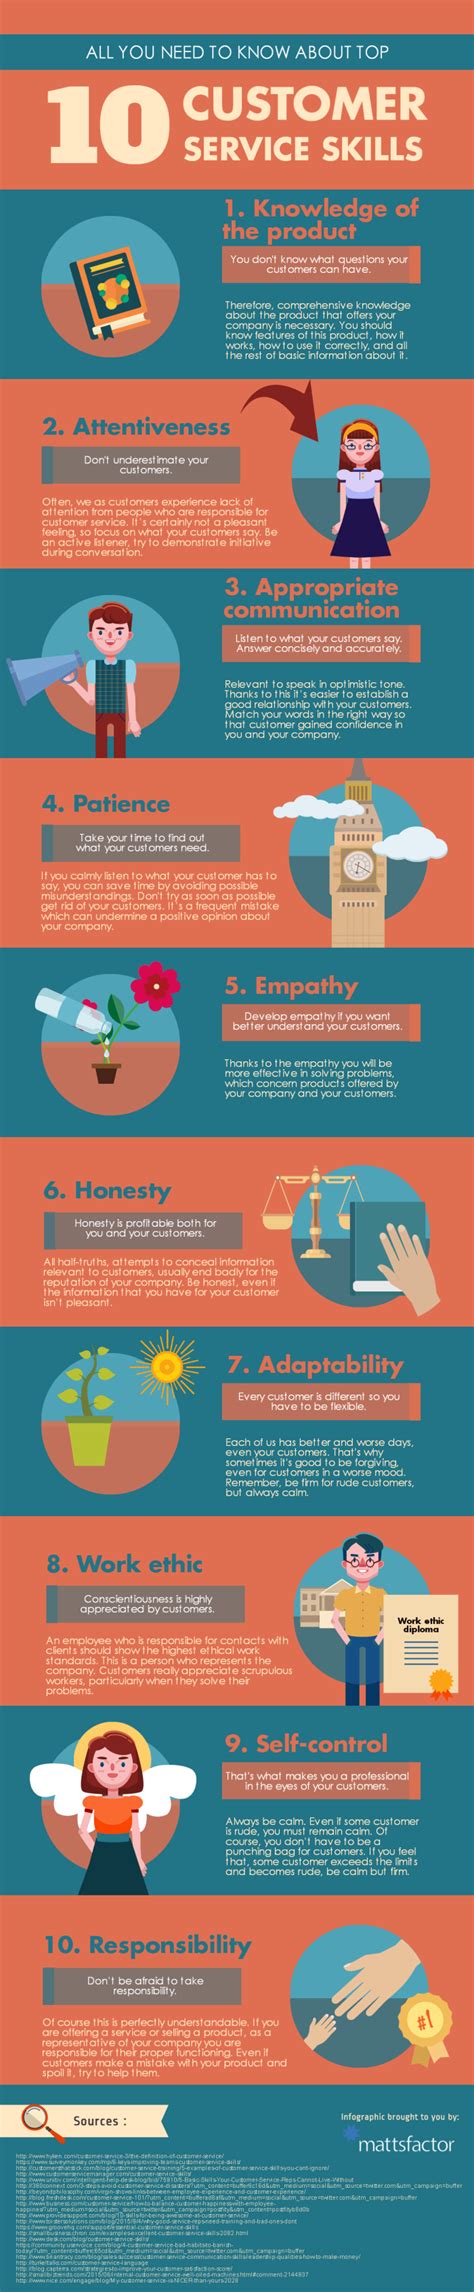 All You Need To Know About Top 10 Customer Service Skills Infographic